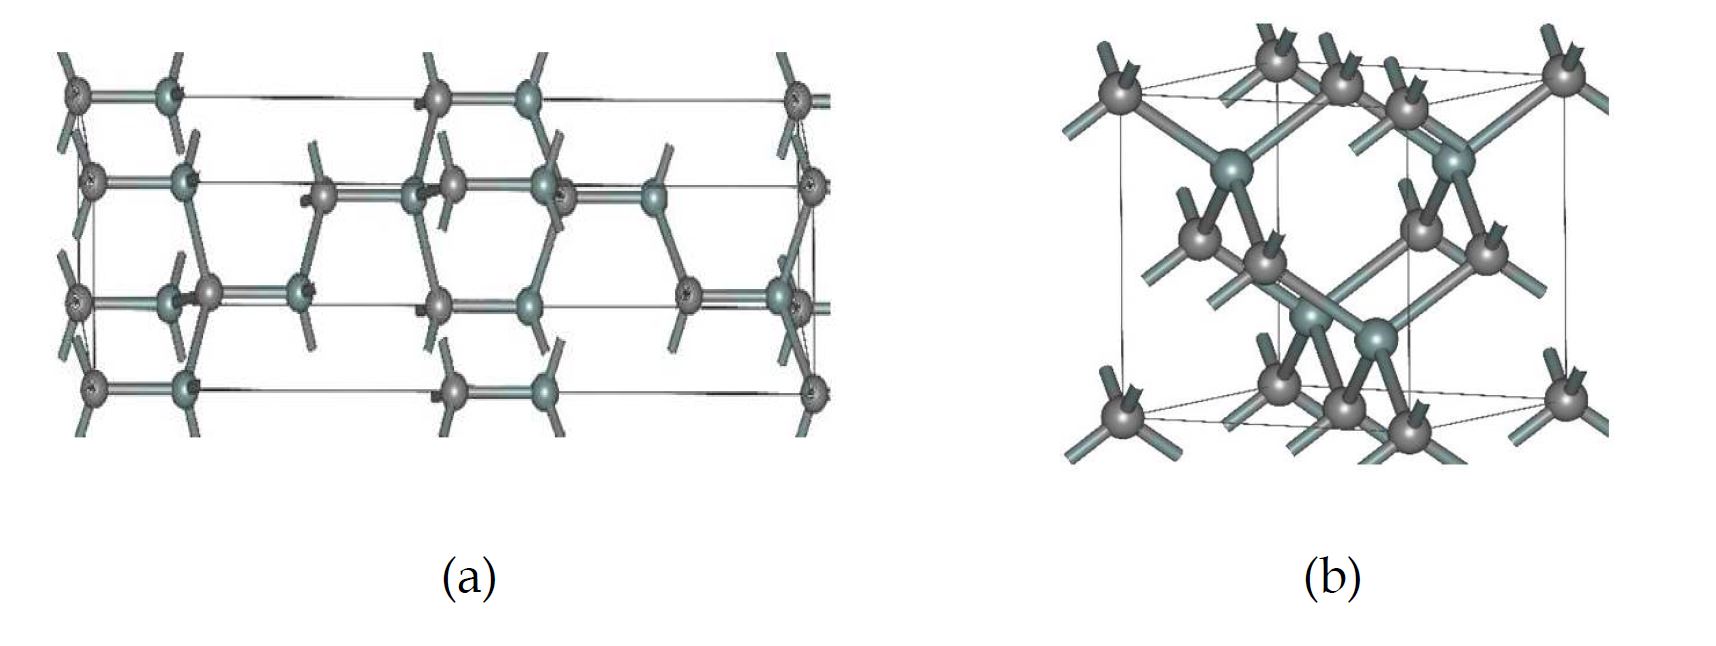 Fig. 3 Structures of (a) α-SiC (b) β-SiC